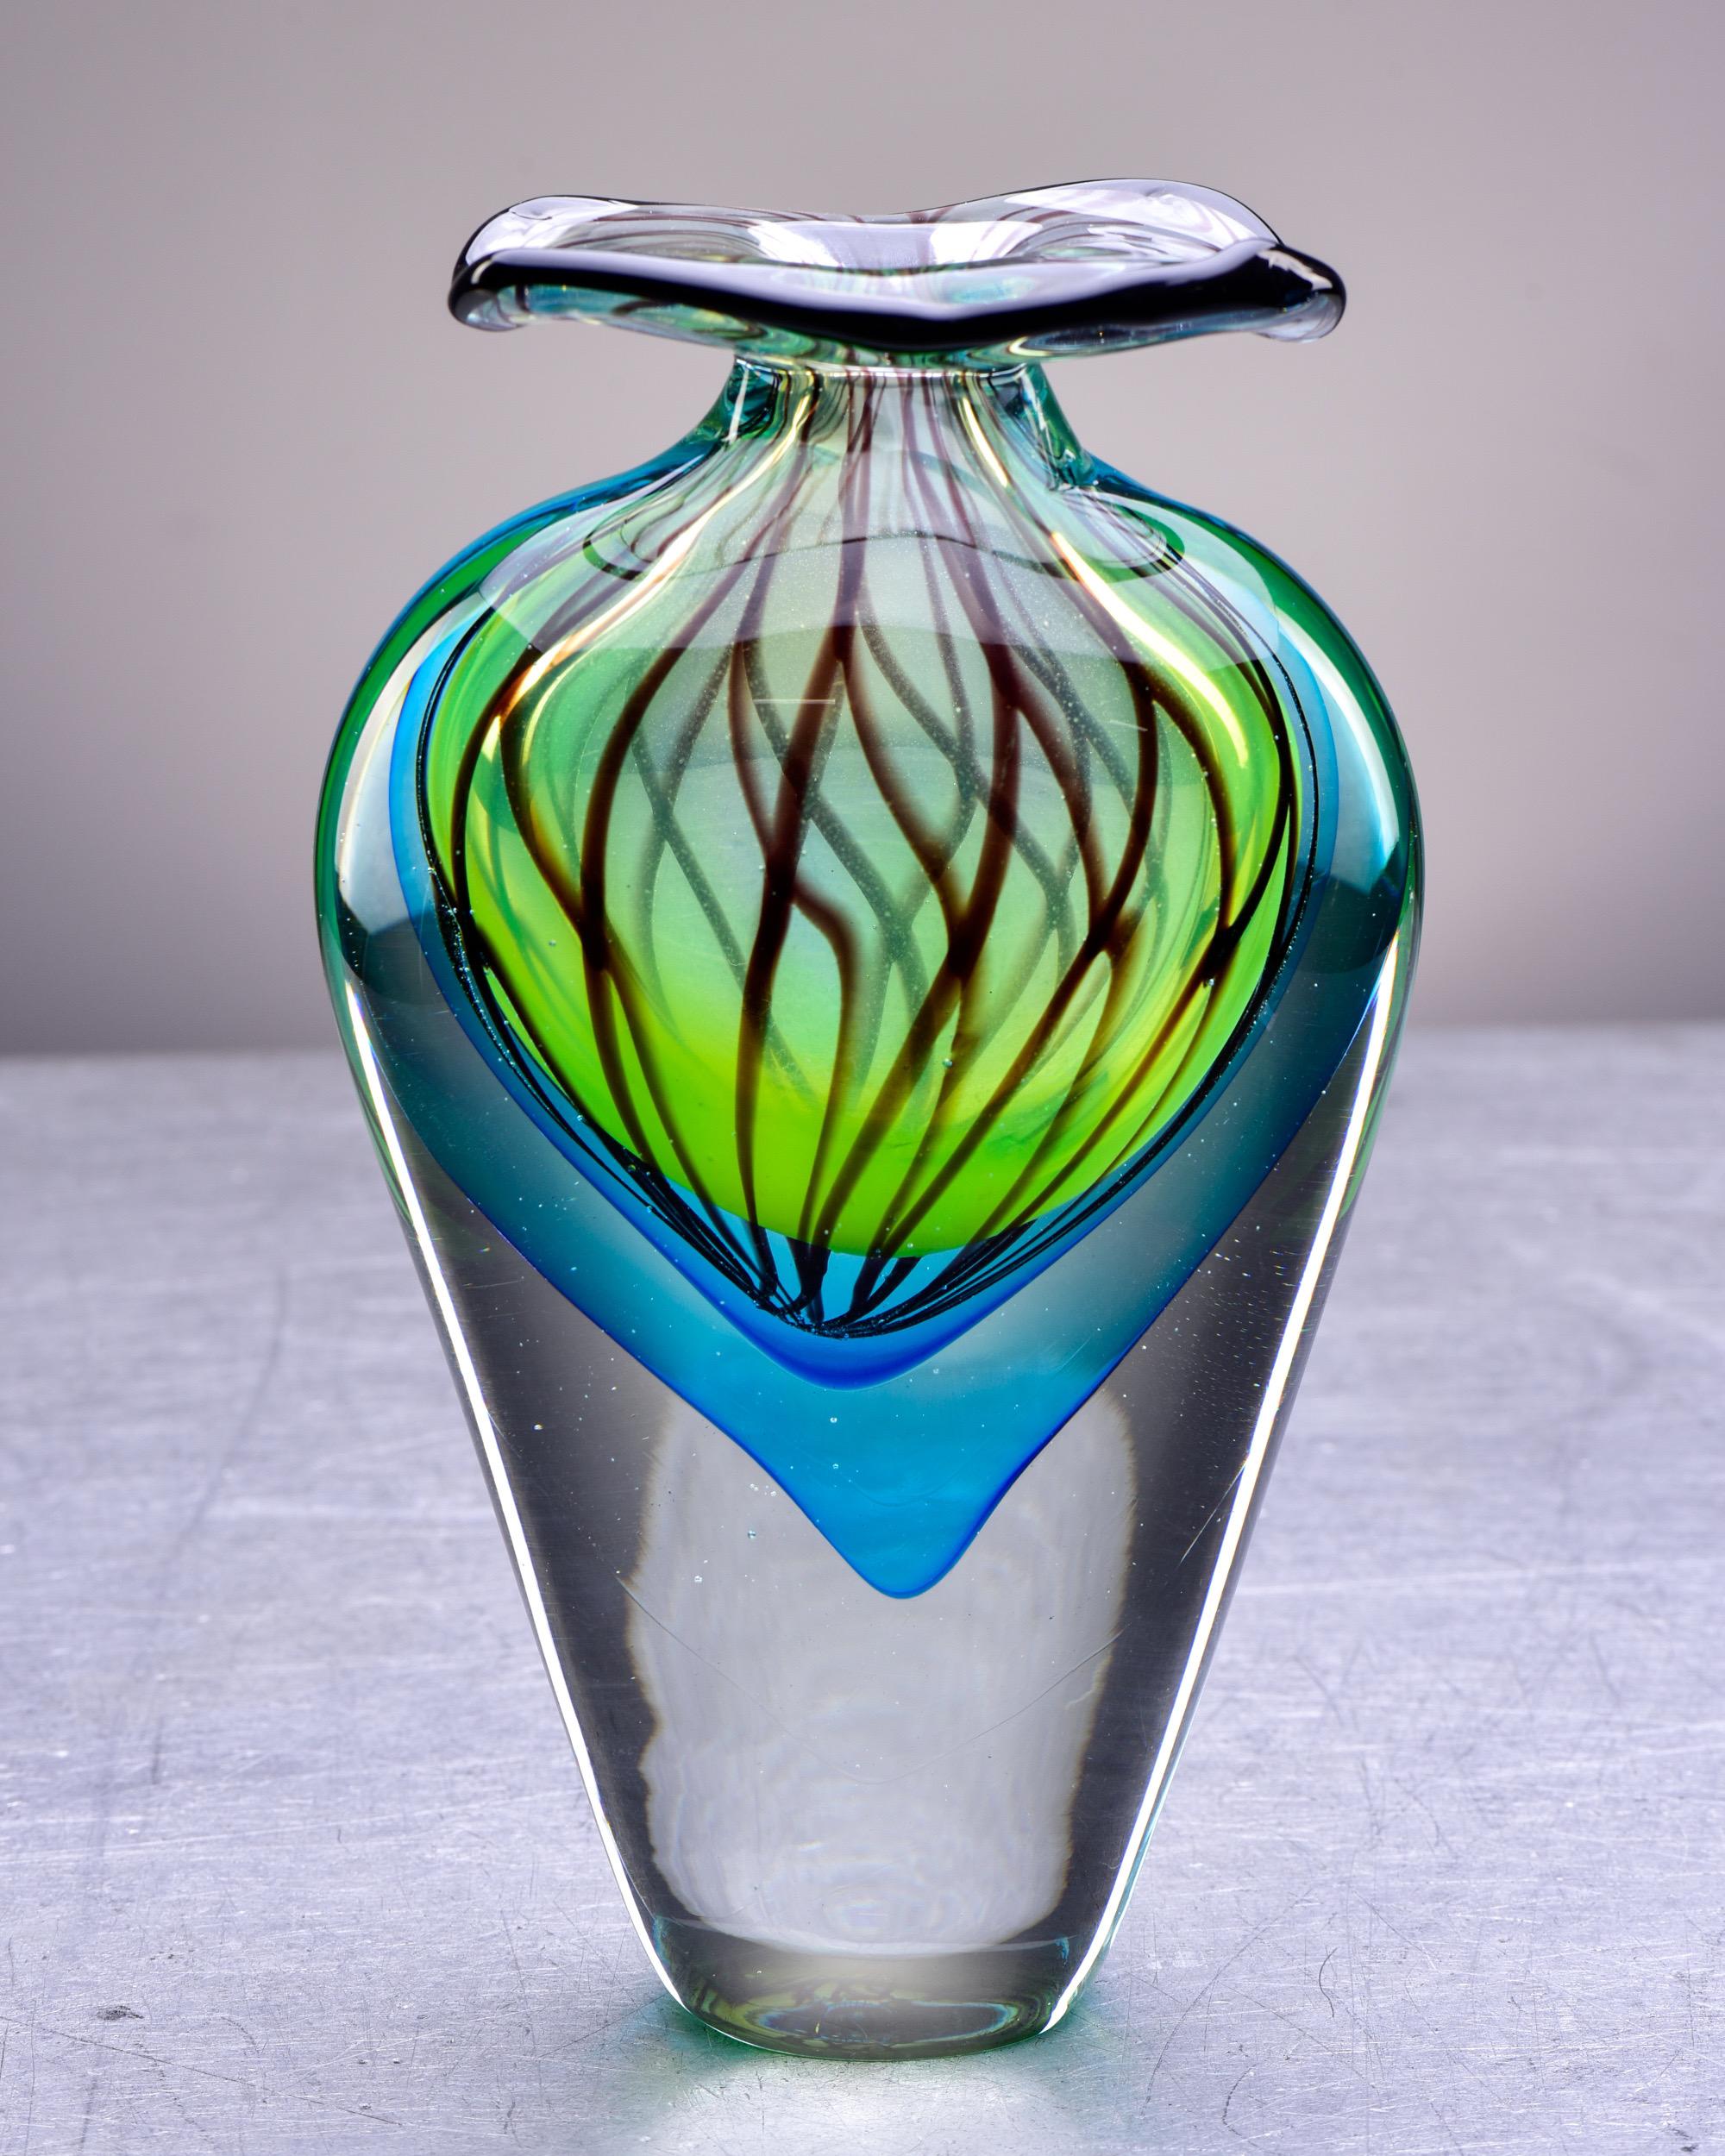 Circa 1990s tall Murano glass vase in sommerso style with heavy, clear glass base with layers of blue and green, dark swirls and a wide, flared lip. Unsigned. Underside of base shows some scratches - see detail photo.